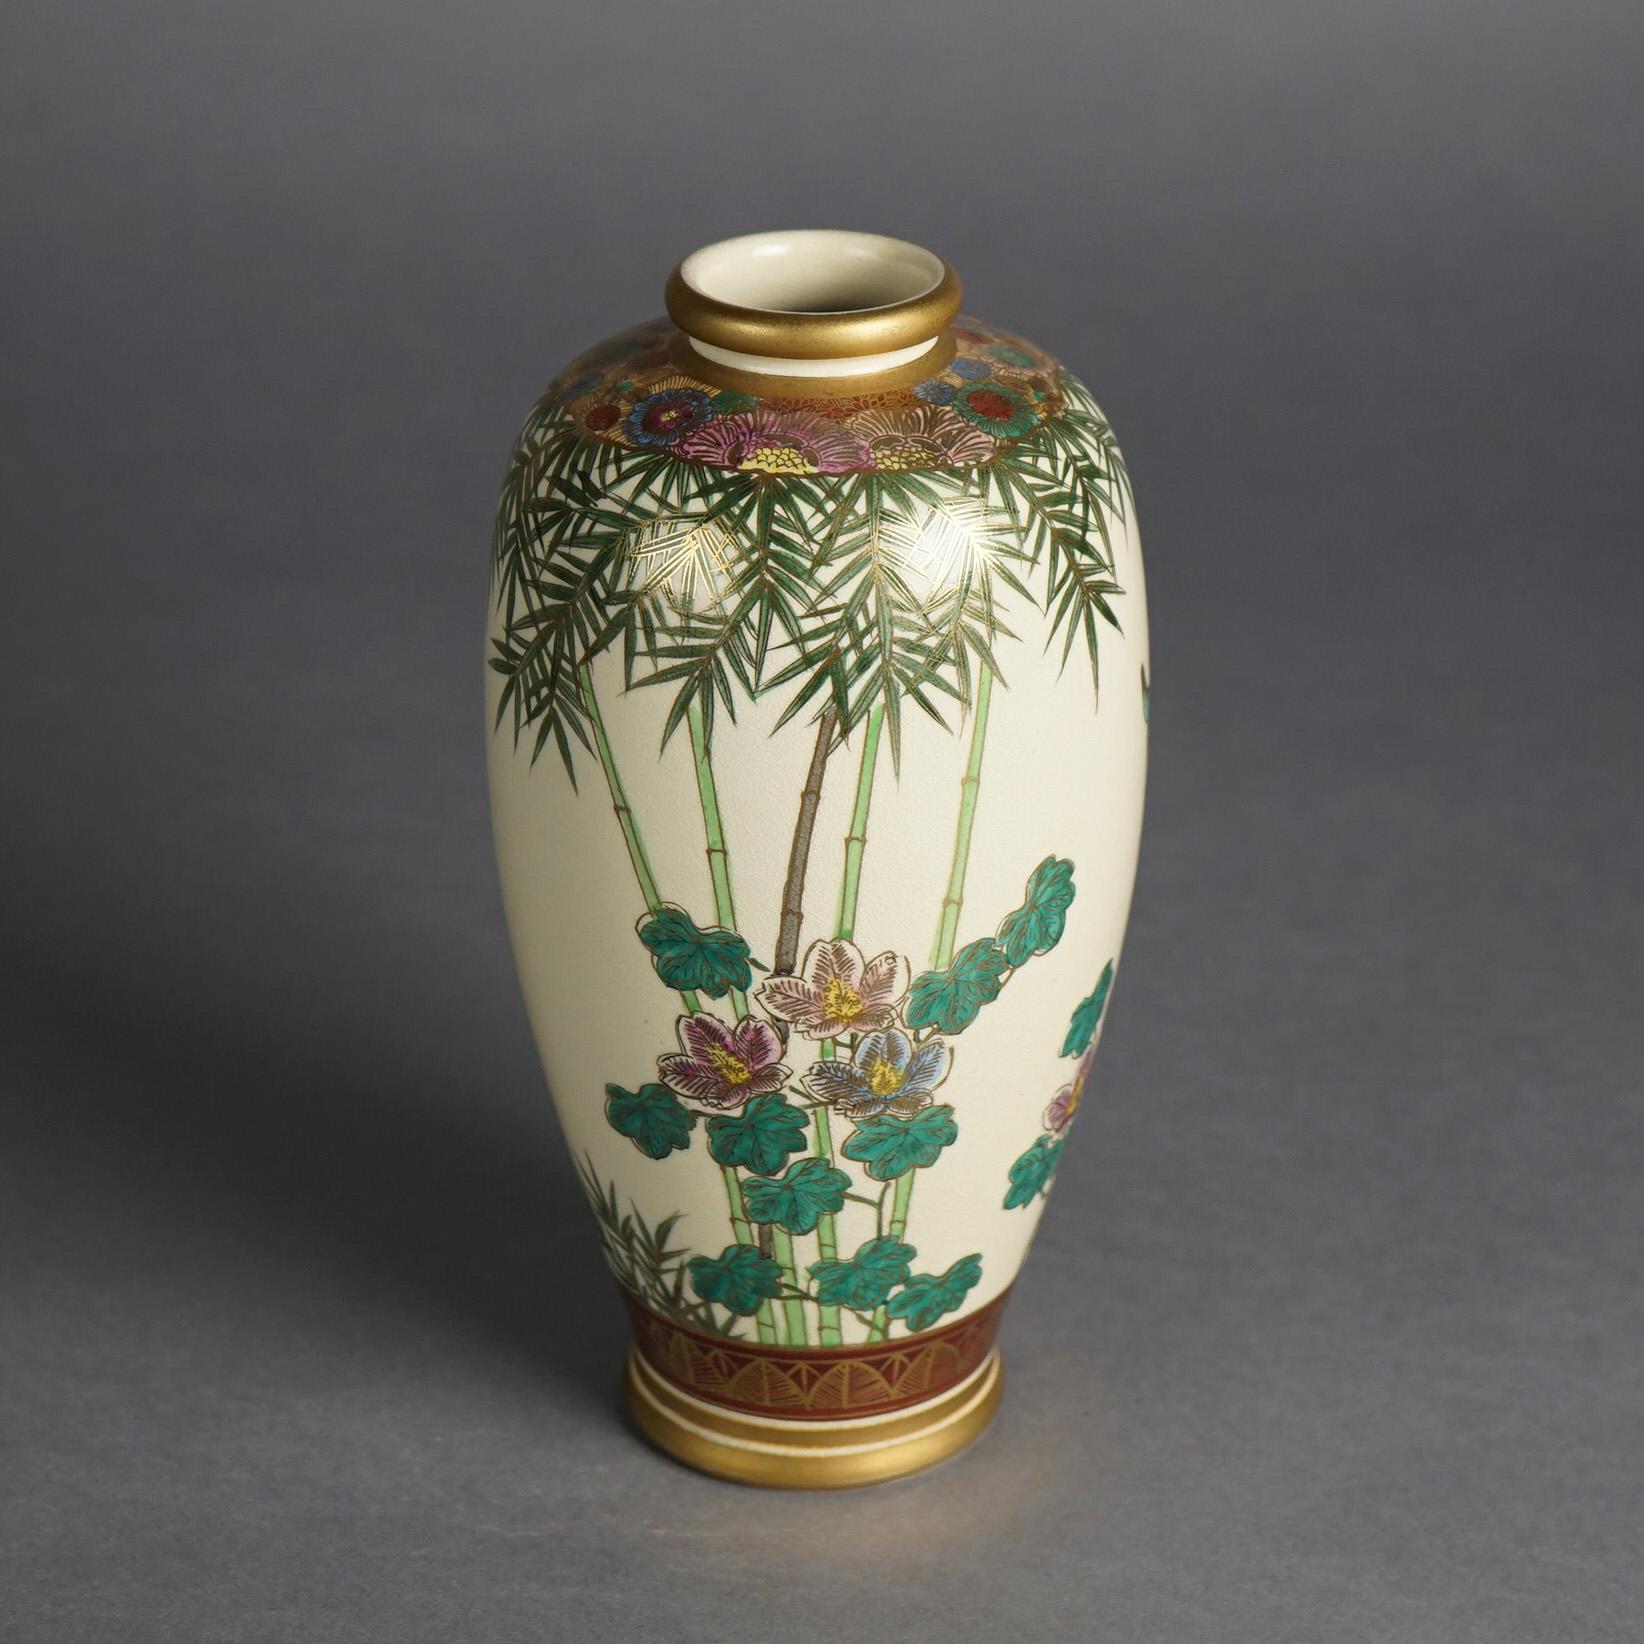 Antique Japanese Meiji Satsuma Hand Painted & Gilt Porcelain Vase with Flowers, Butterfly & Bamboo, C1910

Measures- 8.75''H x 4.5''W x 4.5''D